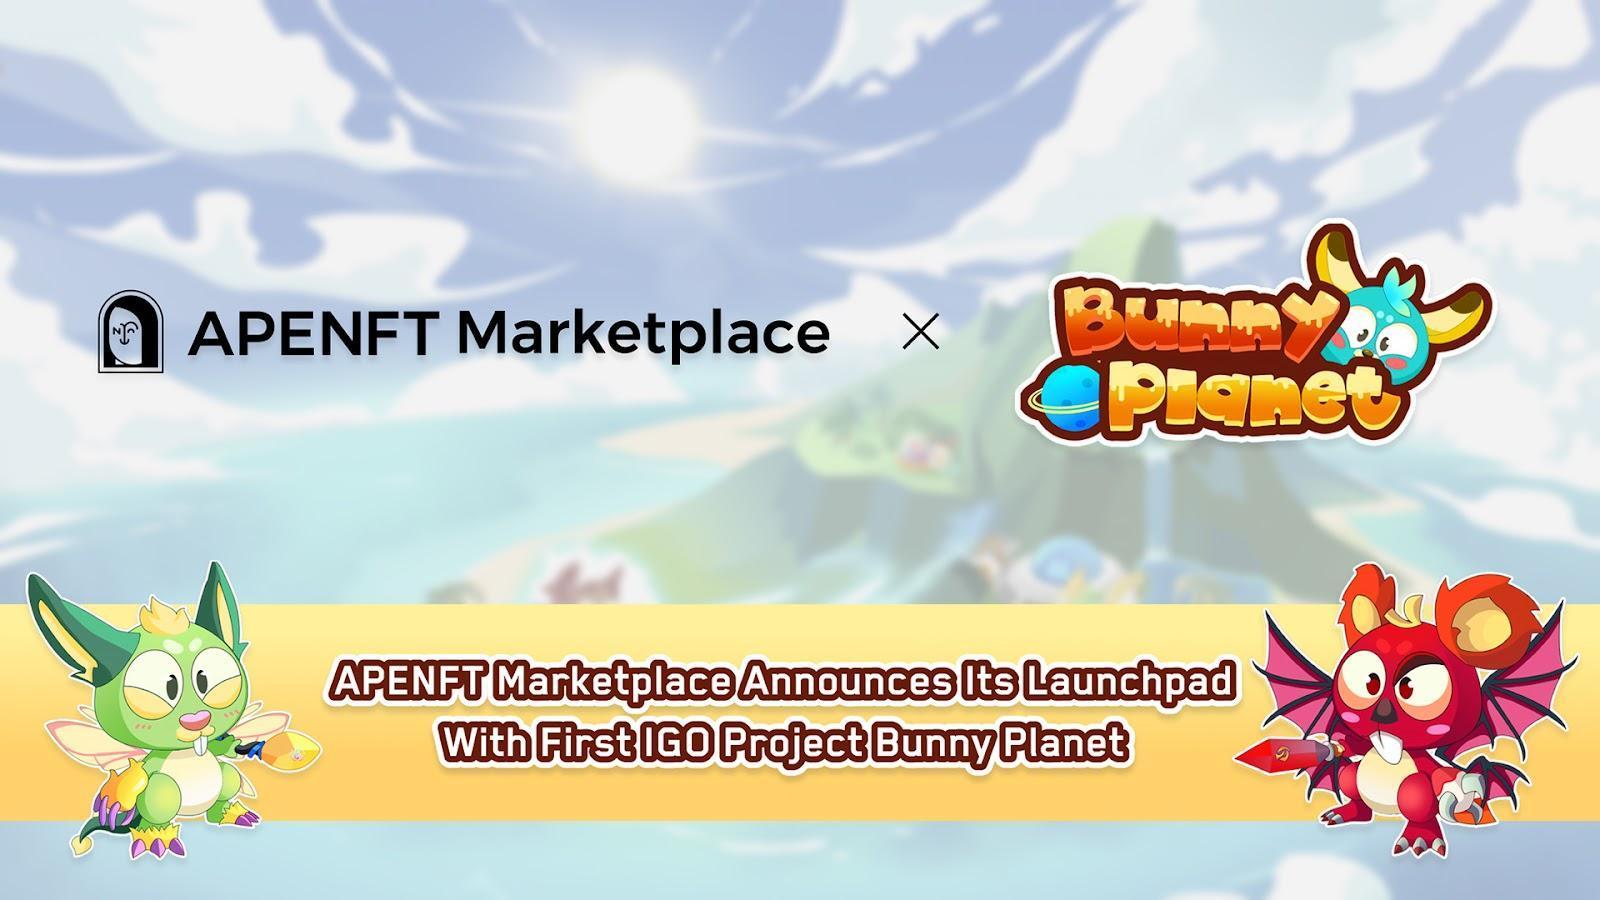 APENFT Marketplace Announces its Launchpad with First IGO Project Bunny Planet